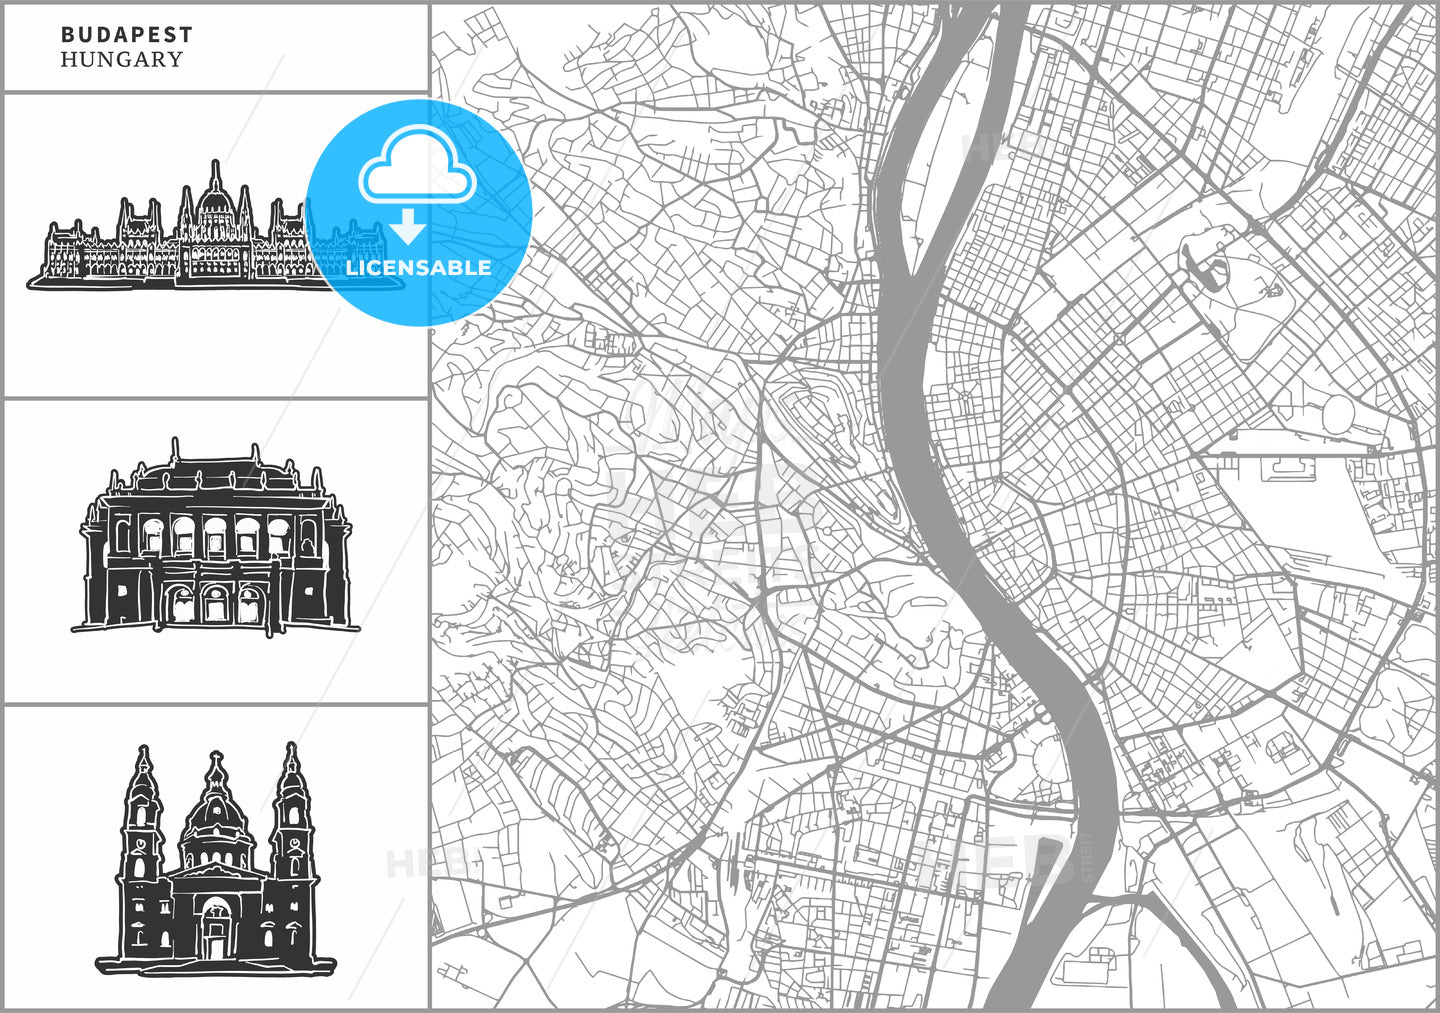 Budapest city map with hand-drawn architecture icons